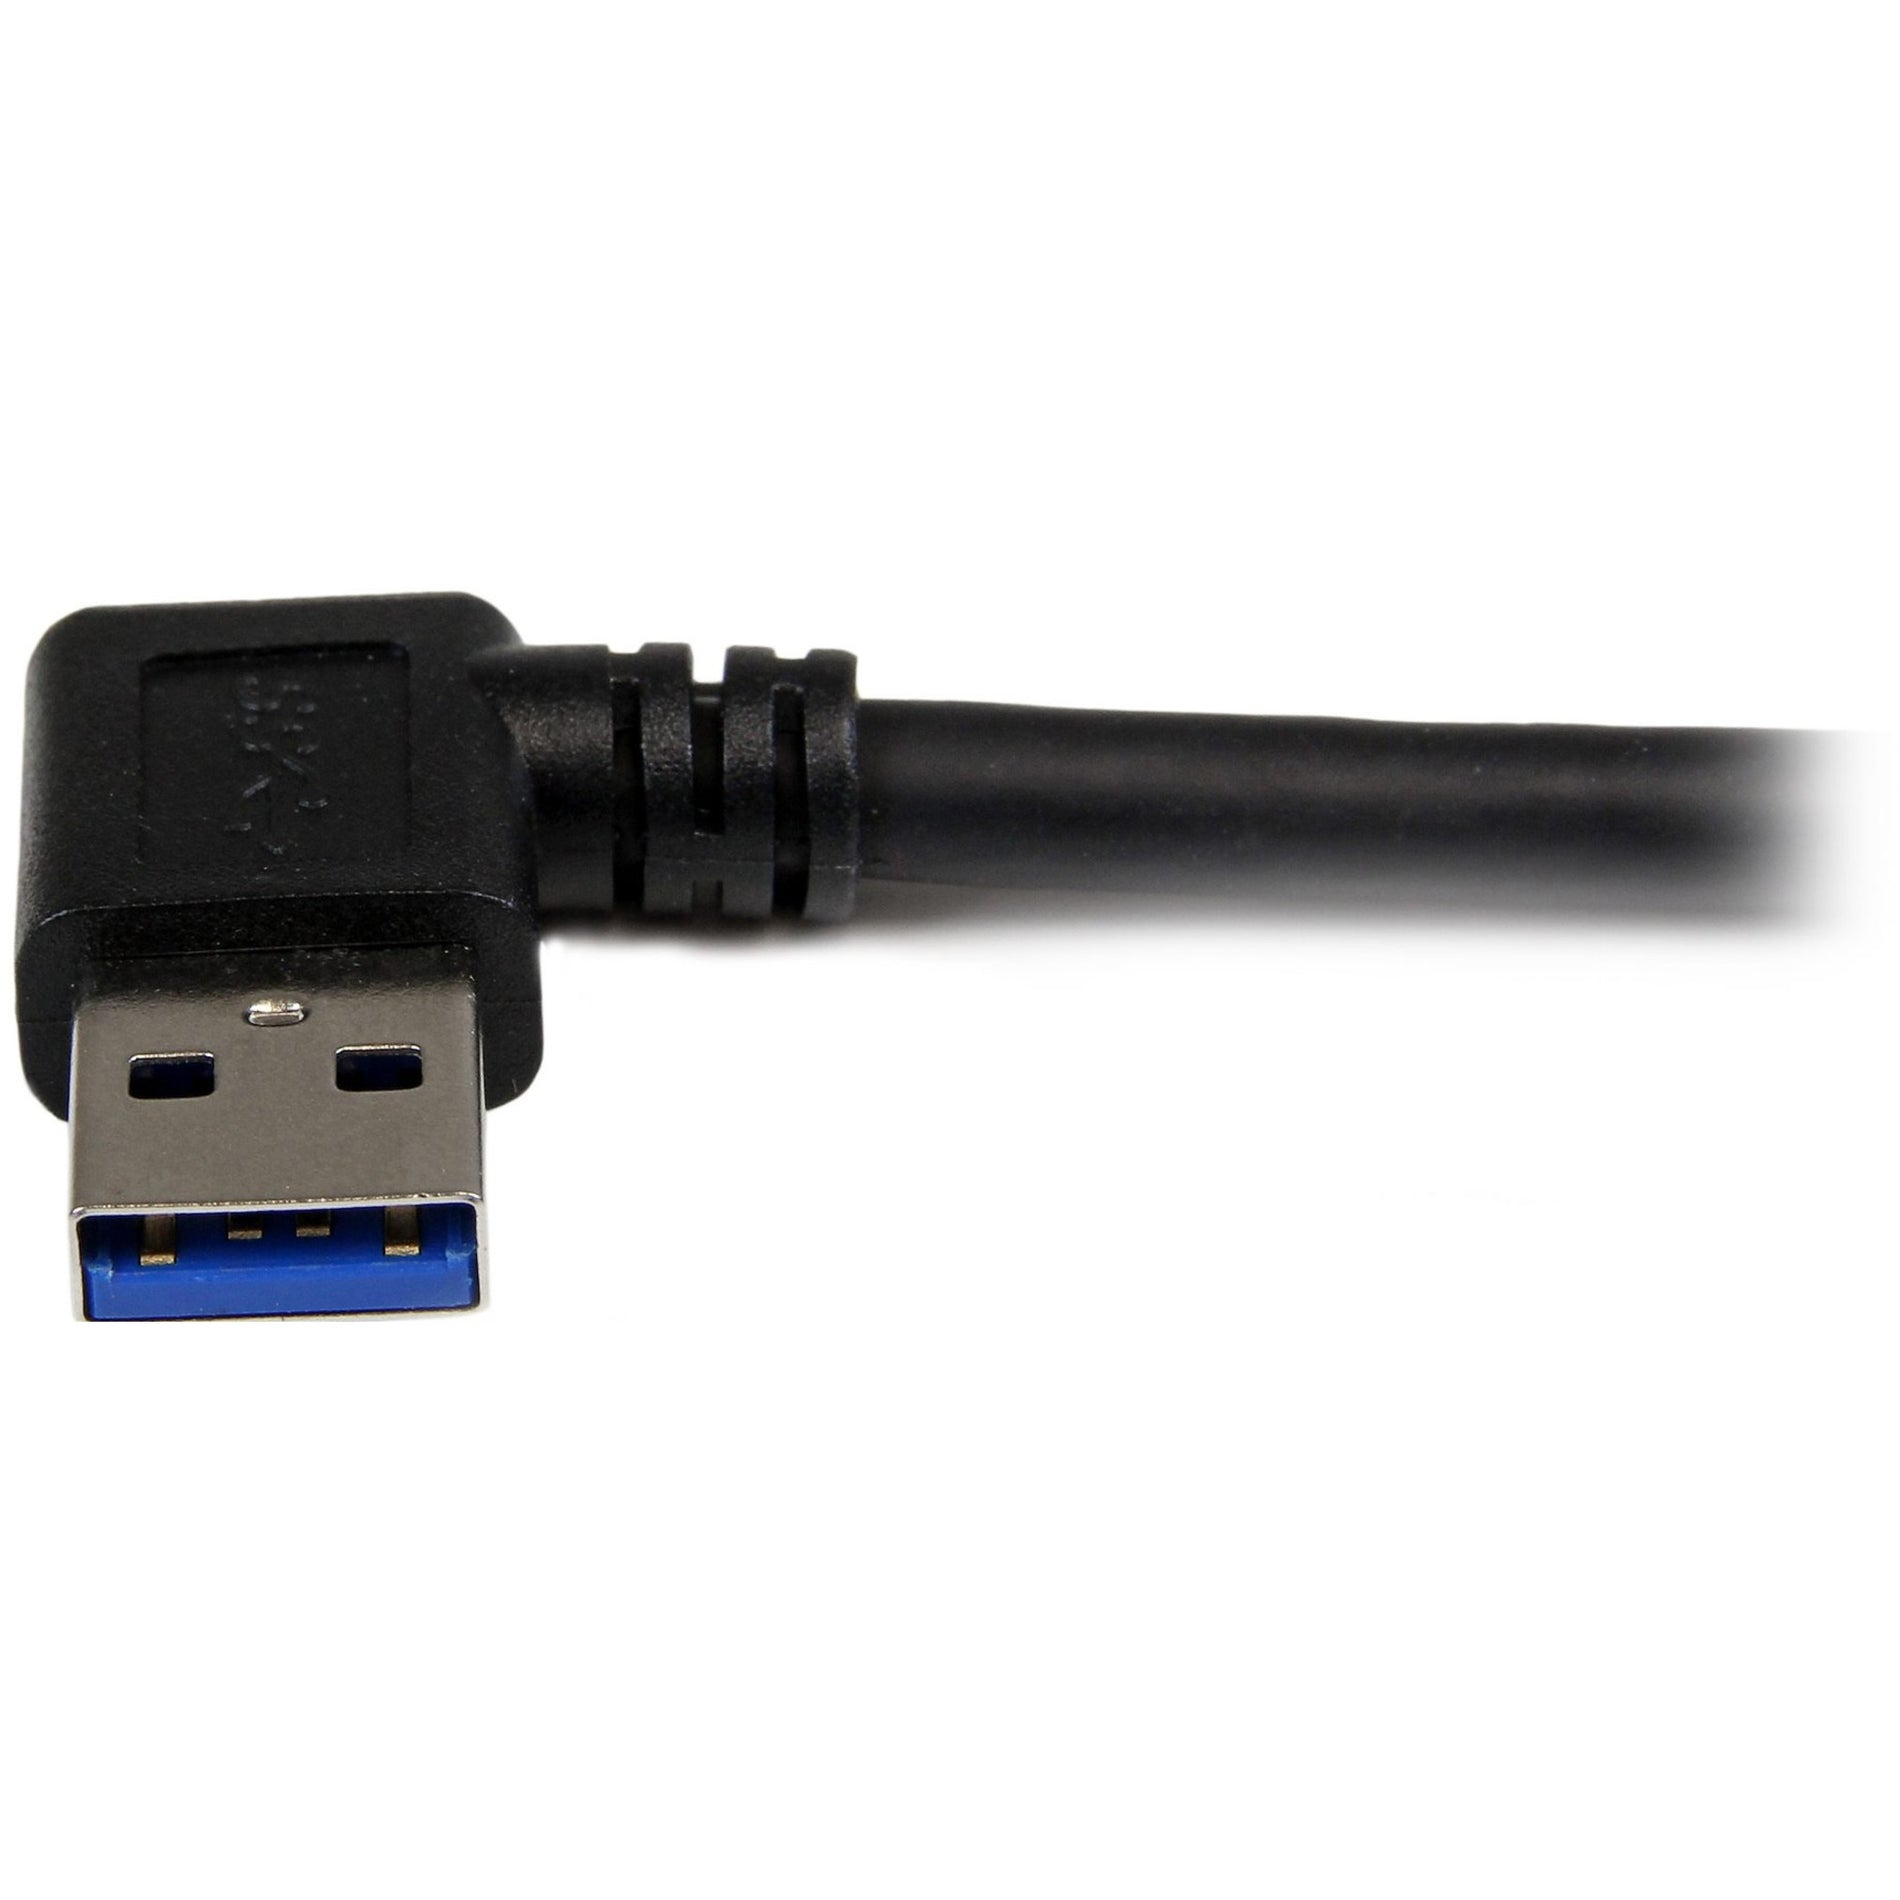 StarTech.com USB3SAB1MRA 1m Black SuperSpeed USB 3.0 Cable - Right Angle A to B, High-Speed Data Transfer